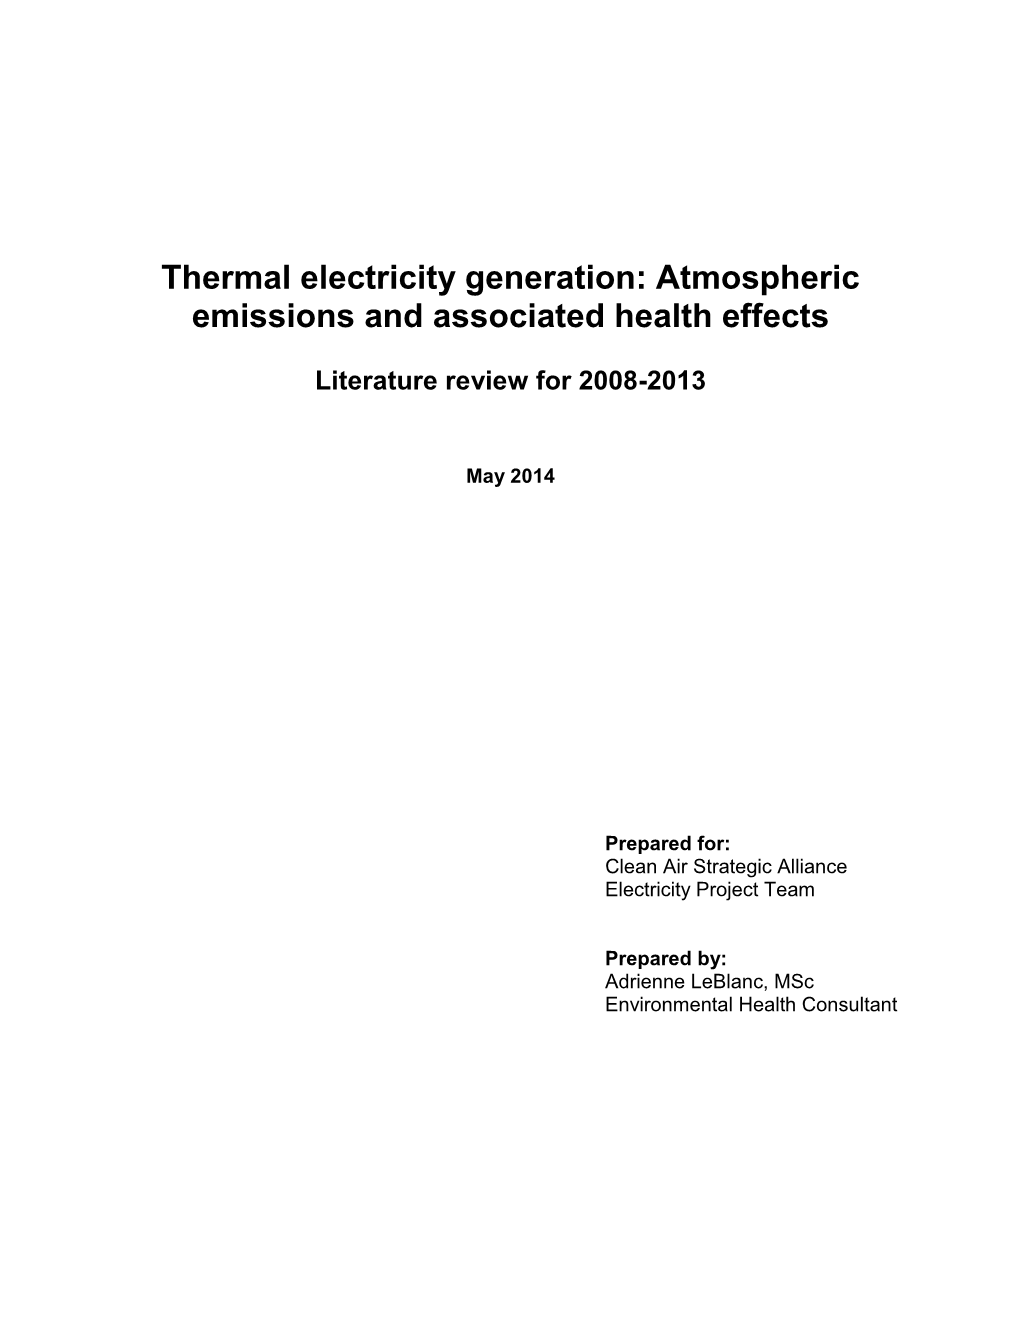 Thermal Electricity Generation: Atmospheric Emissions and Associated Health Effects